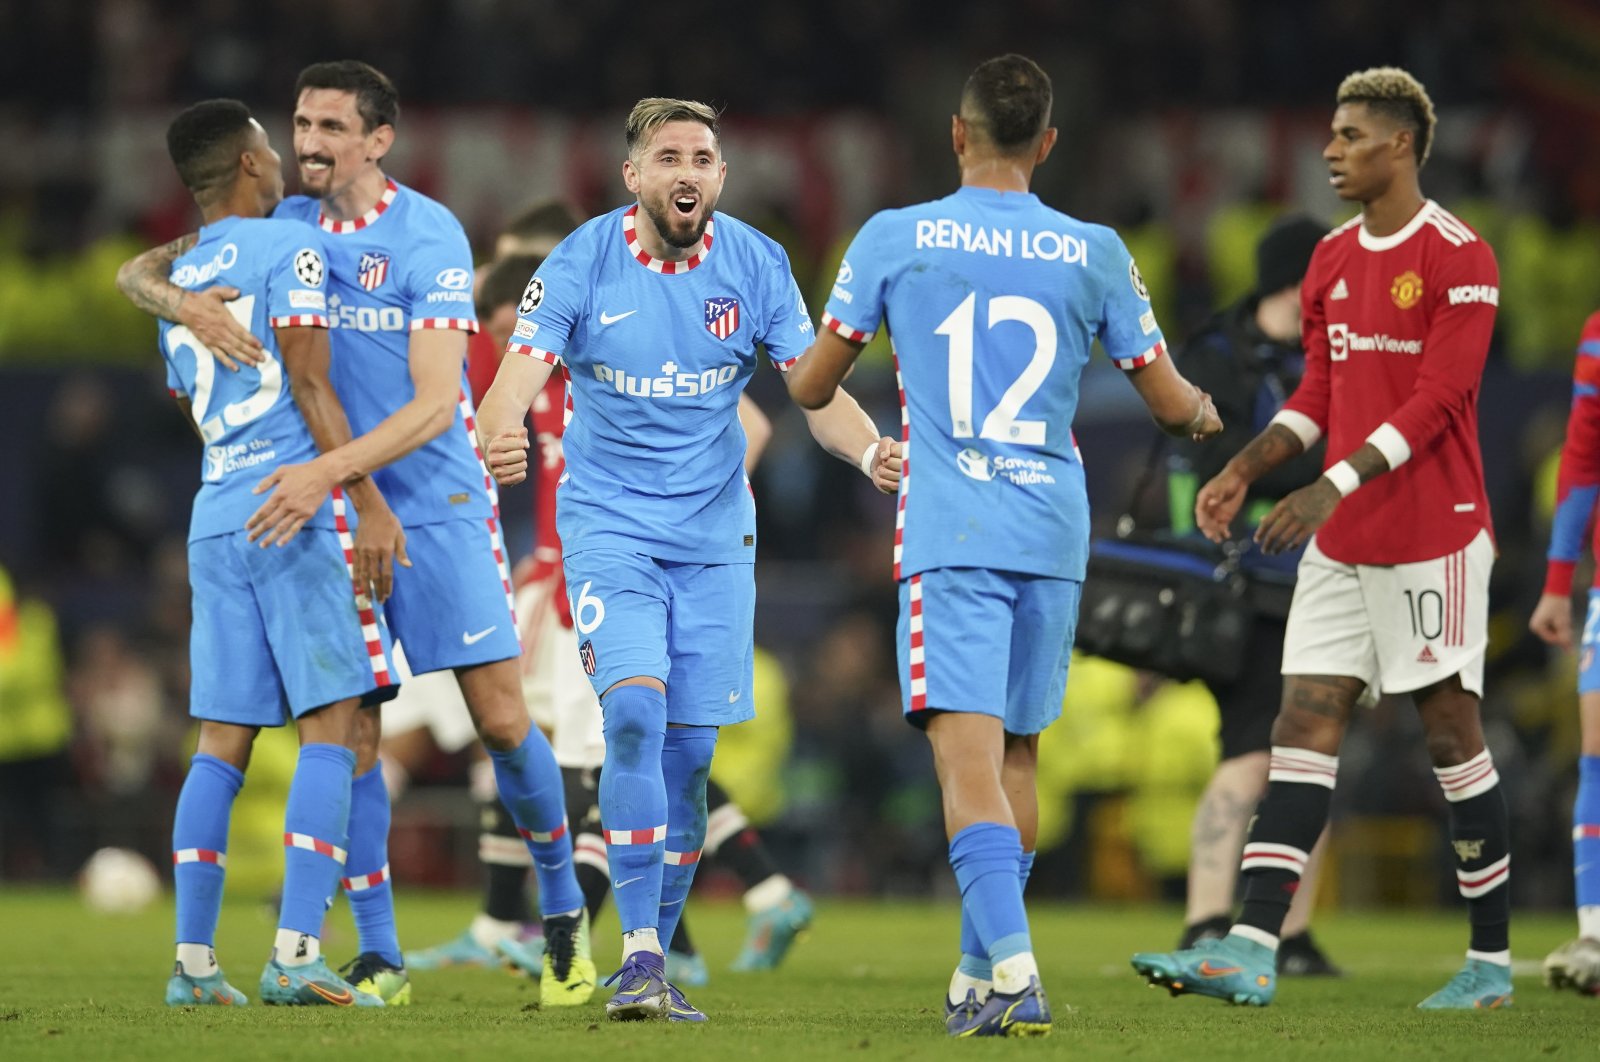 Atletico players celebrate winning their Champions League round of 16, second leg match against Manchester United, Manchester, England, March 15, 2022. (AP Photo)